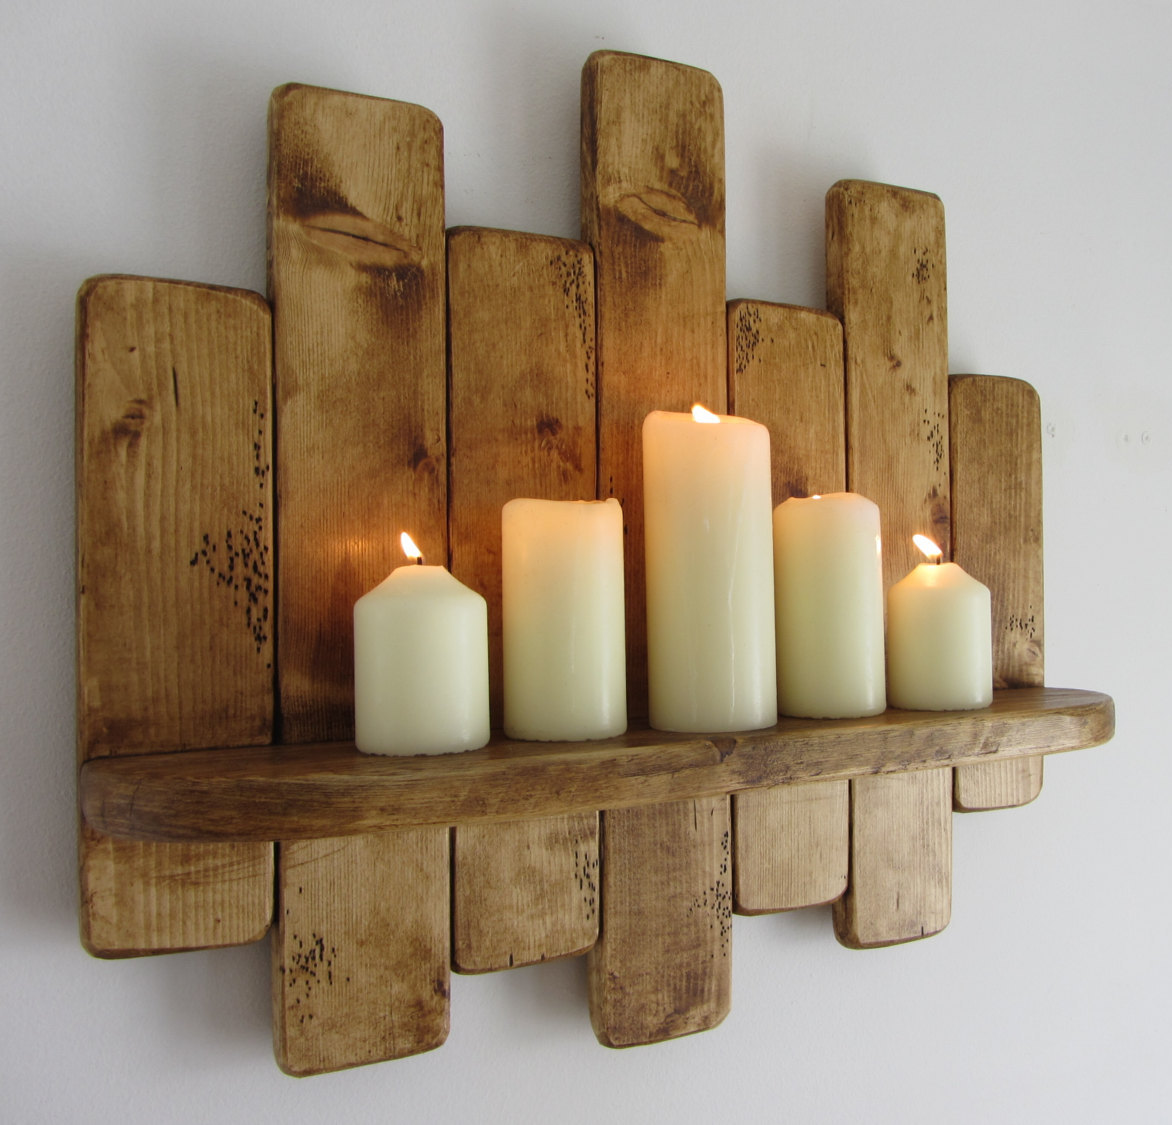 Cute wood pallet shelf ideas for your interior